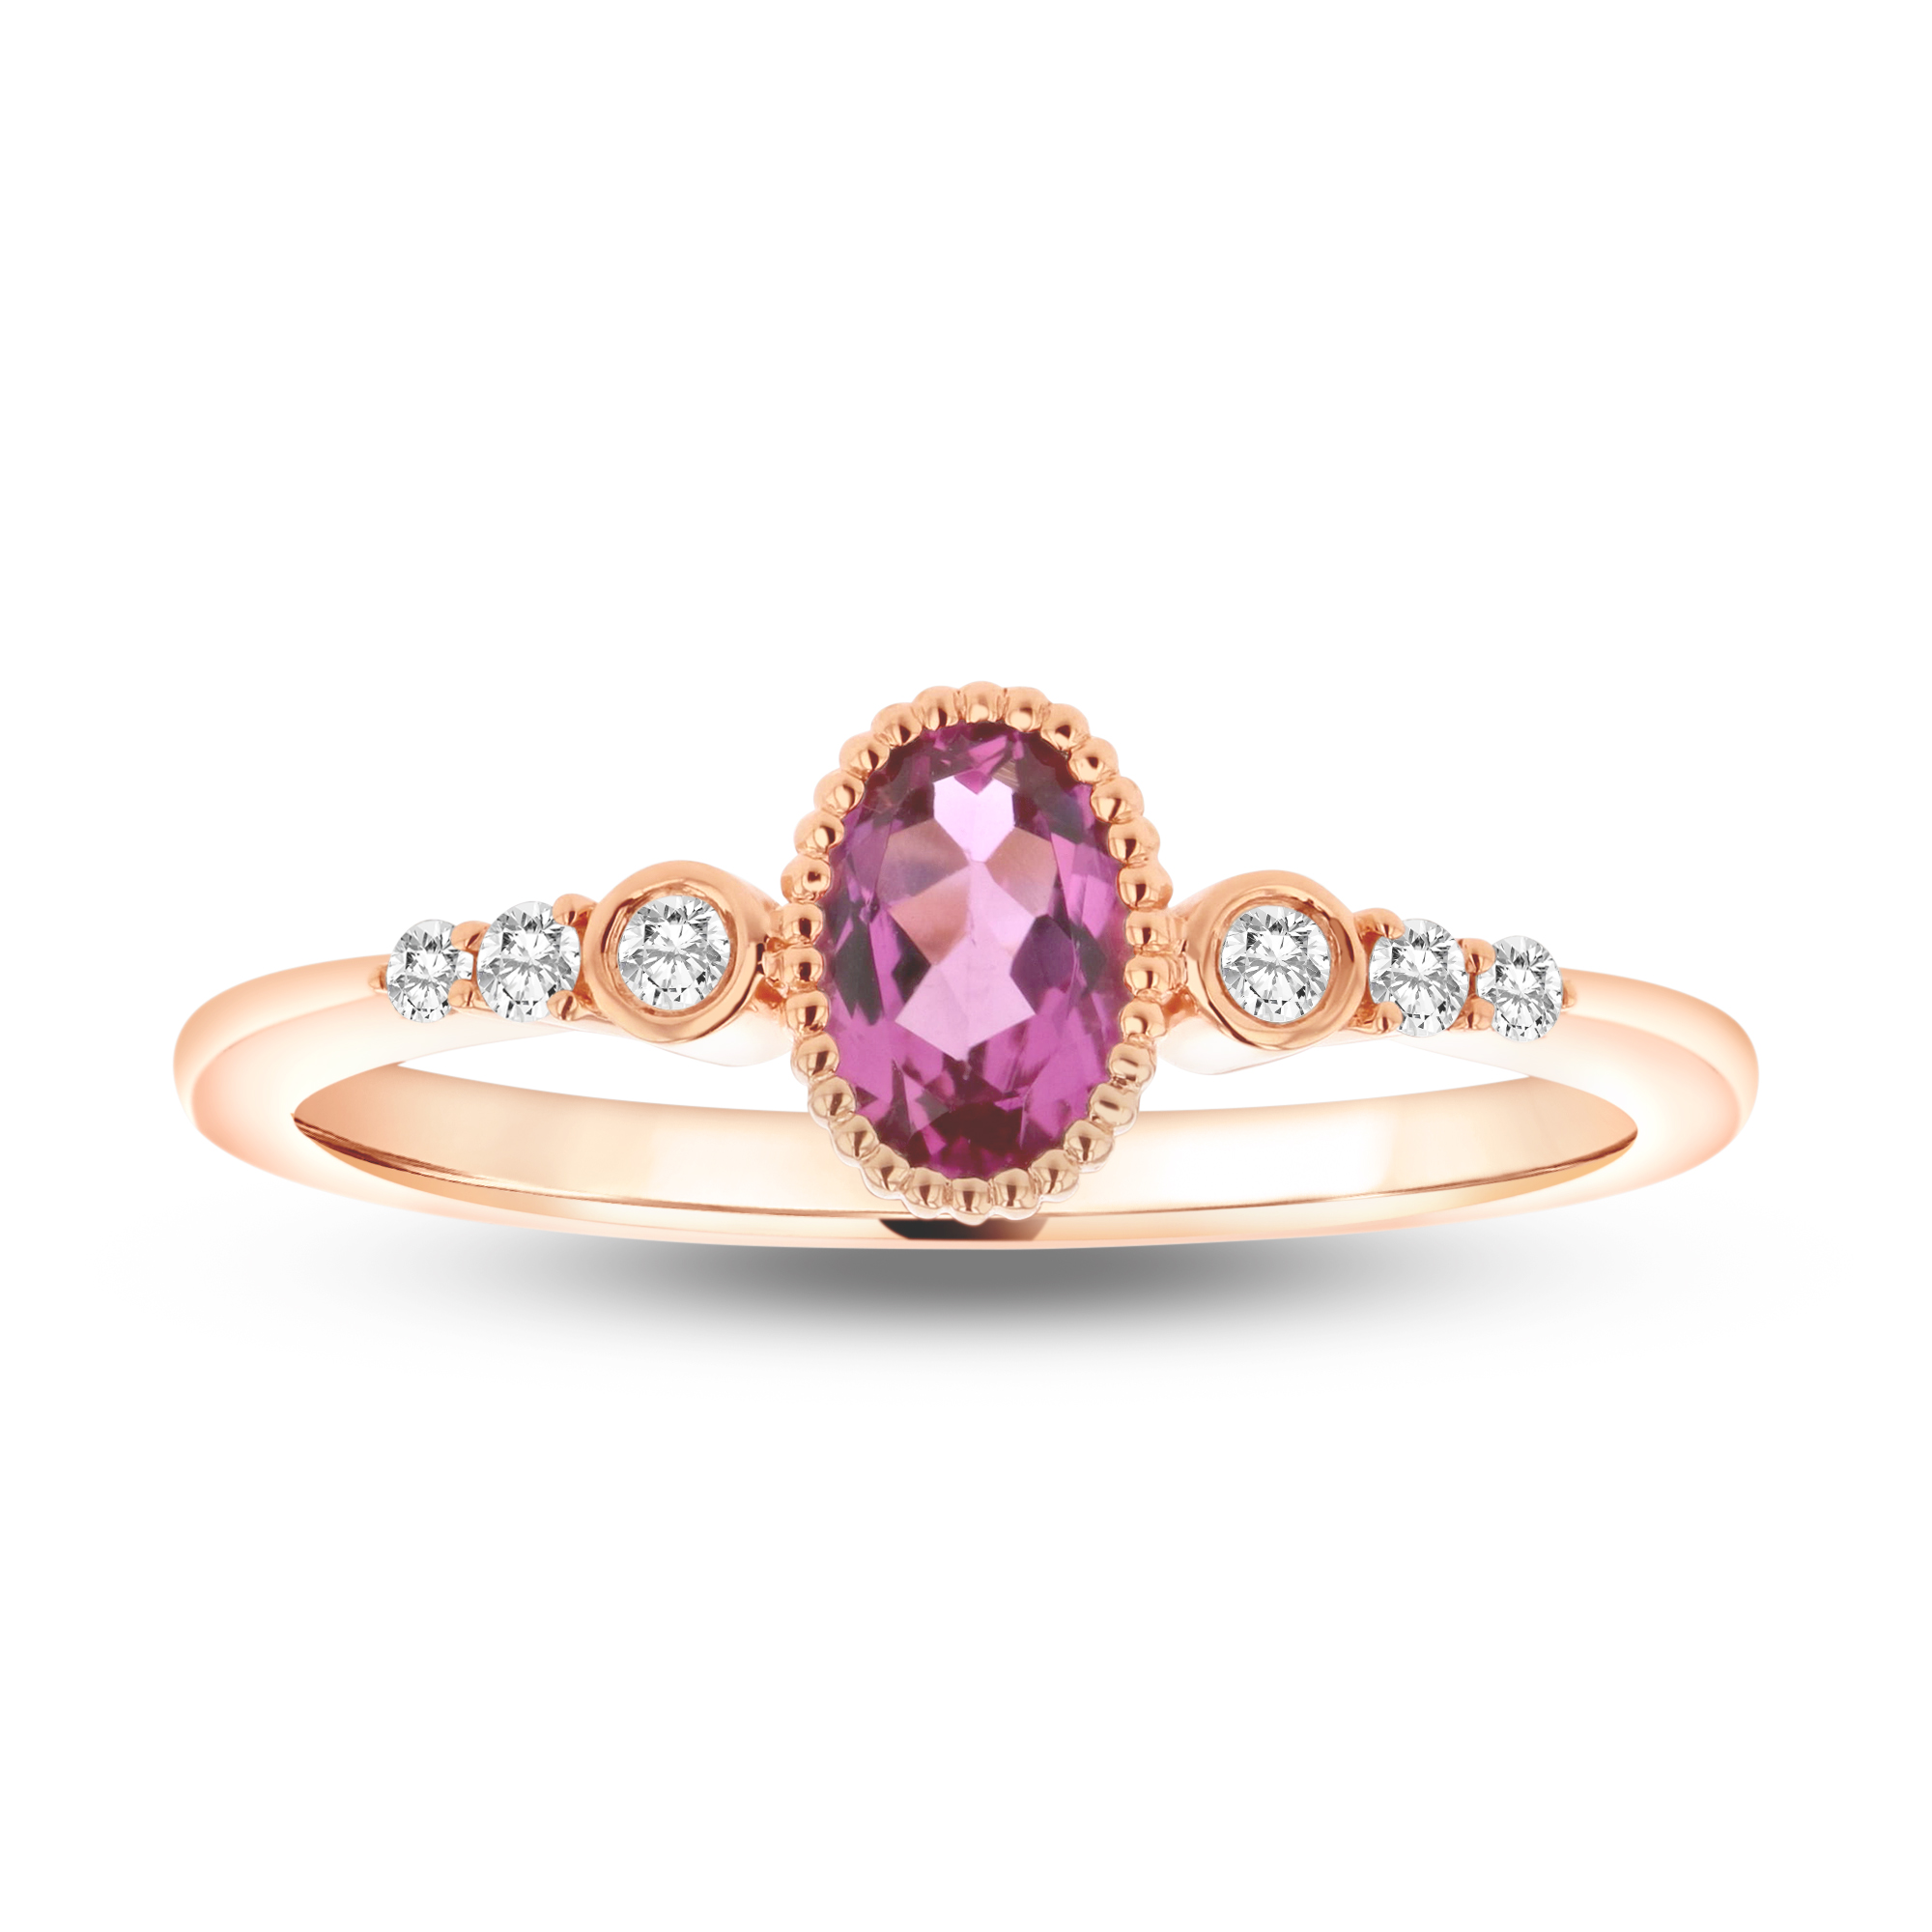 0.08ctw Diamond and Pink Toumaline Ring in 14k Rose Gold